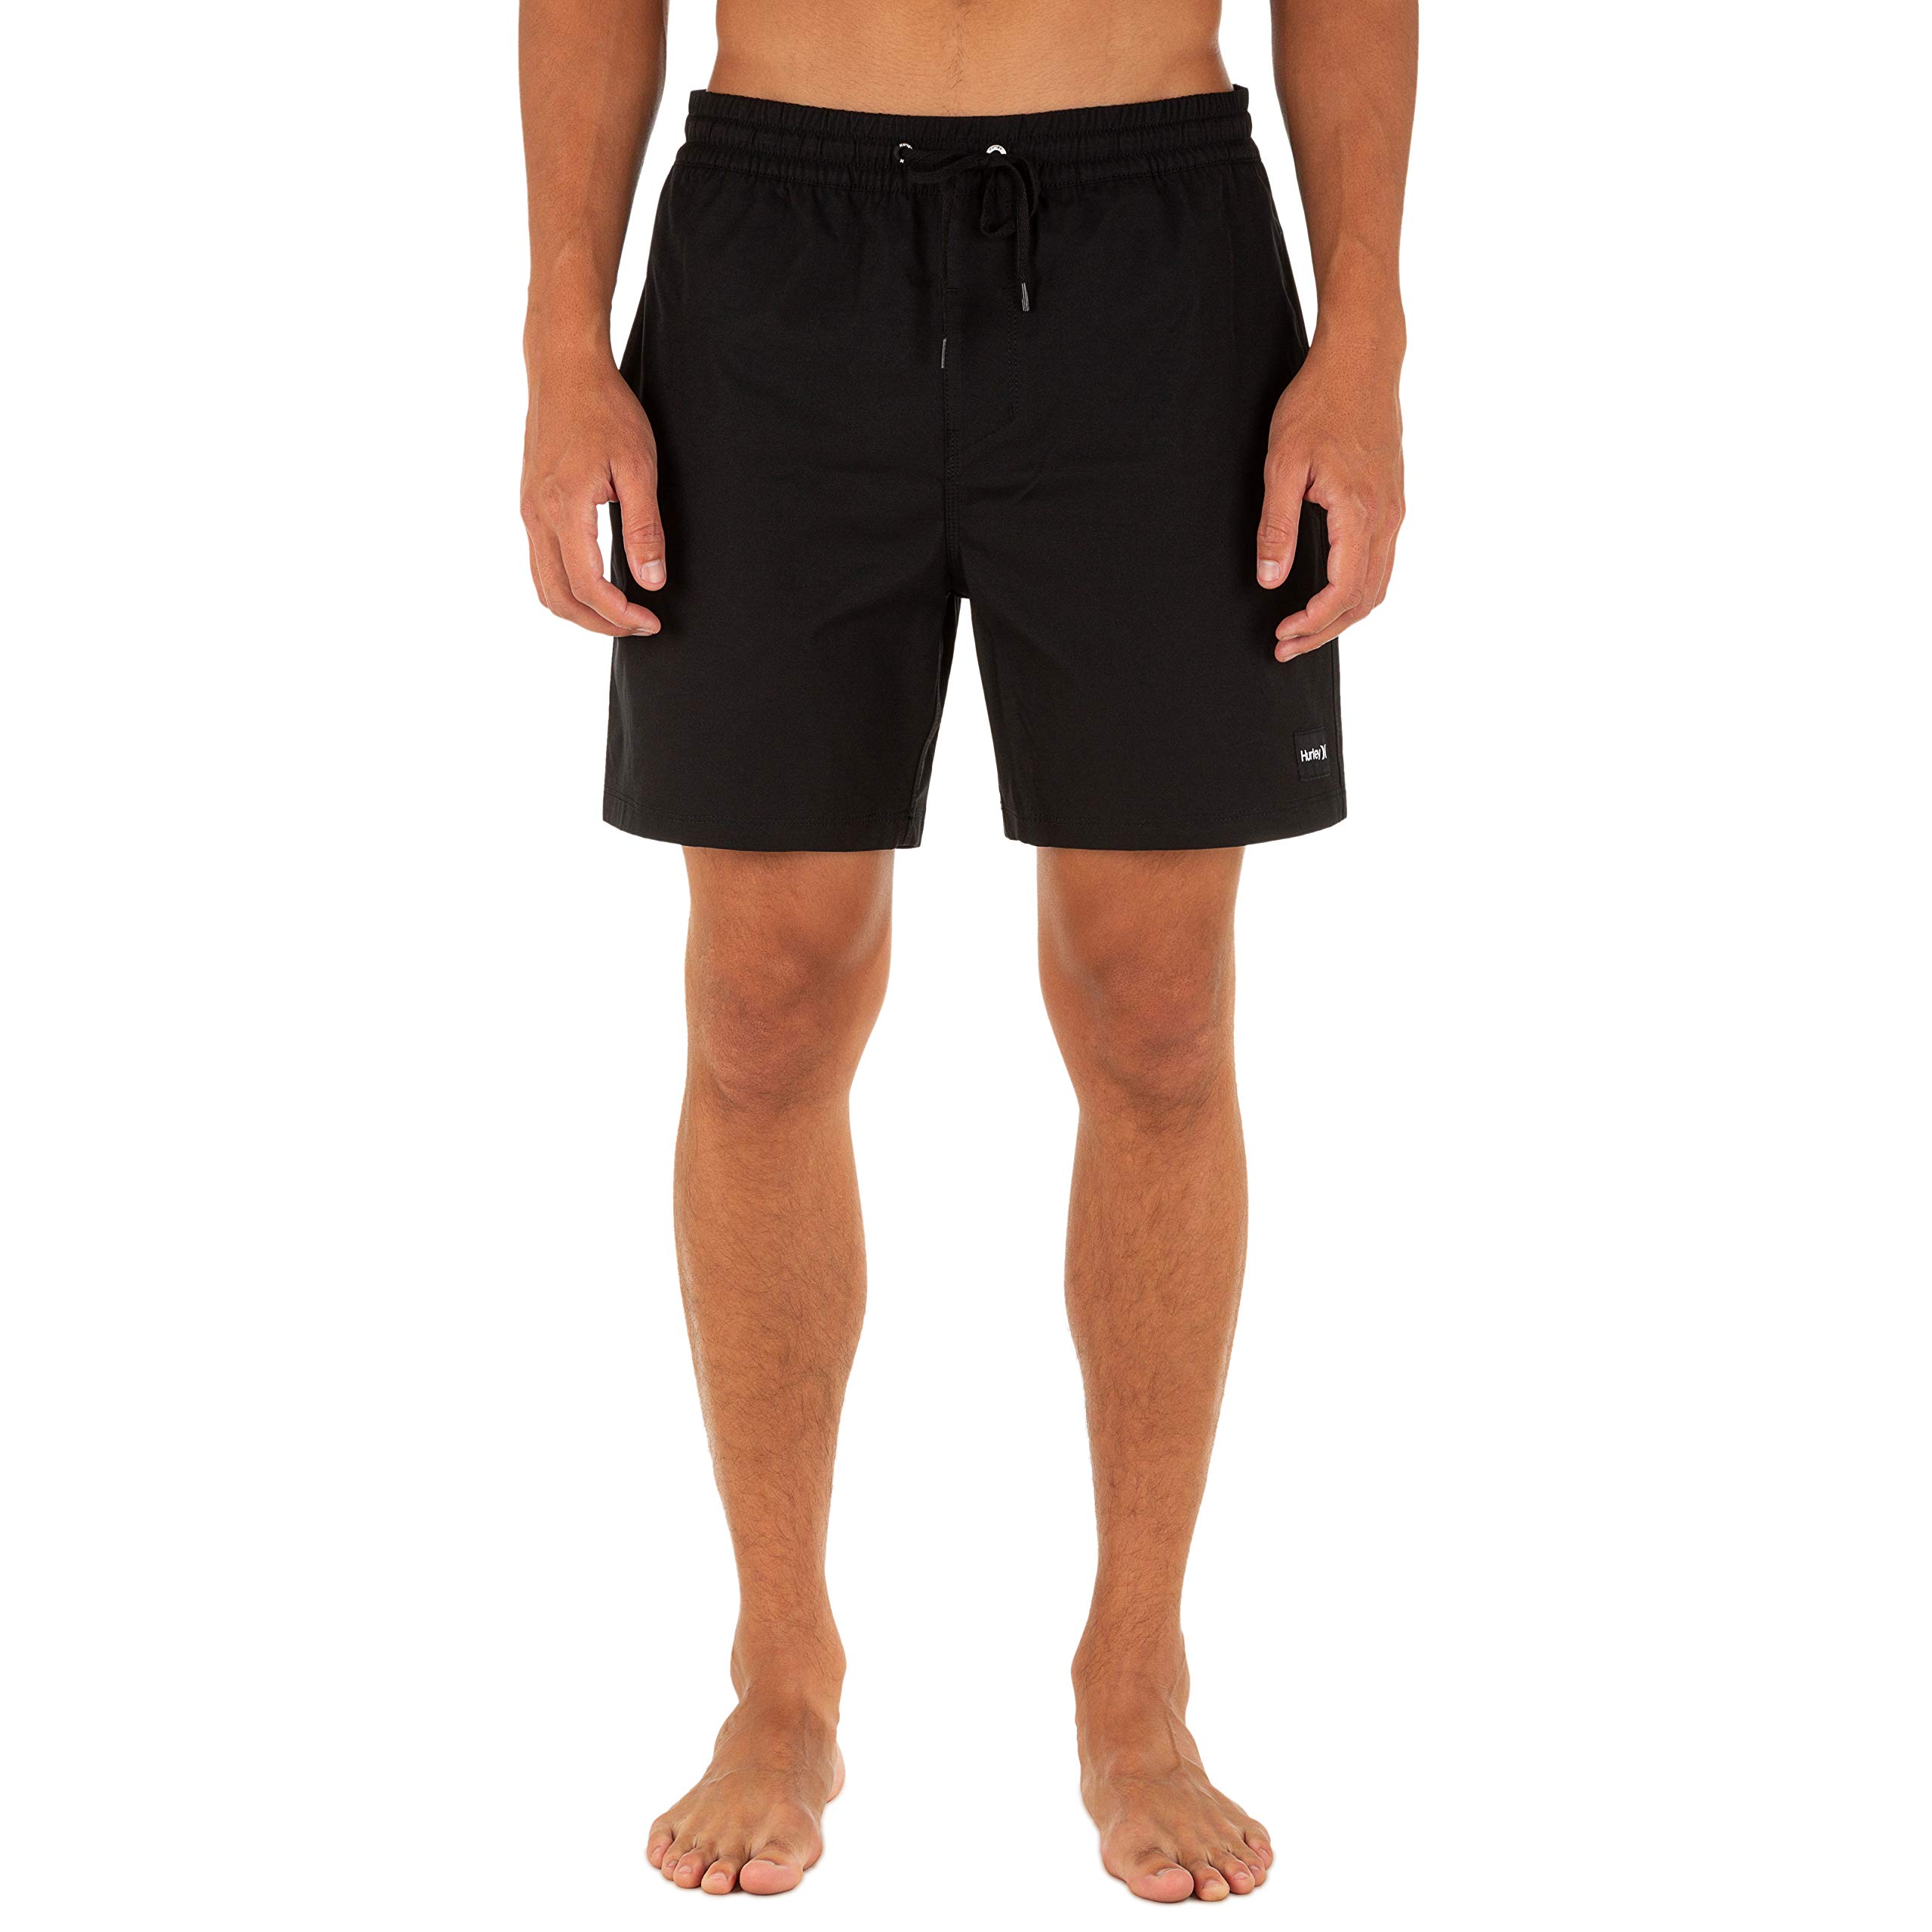 Hurley Men's One and Only 17